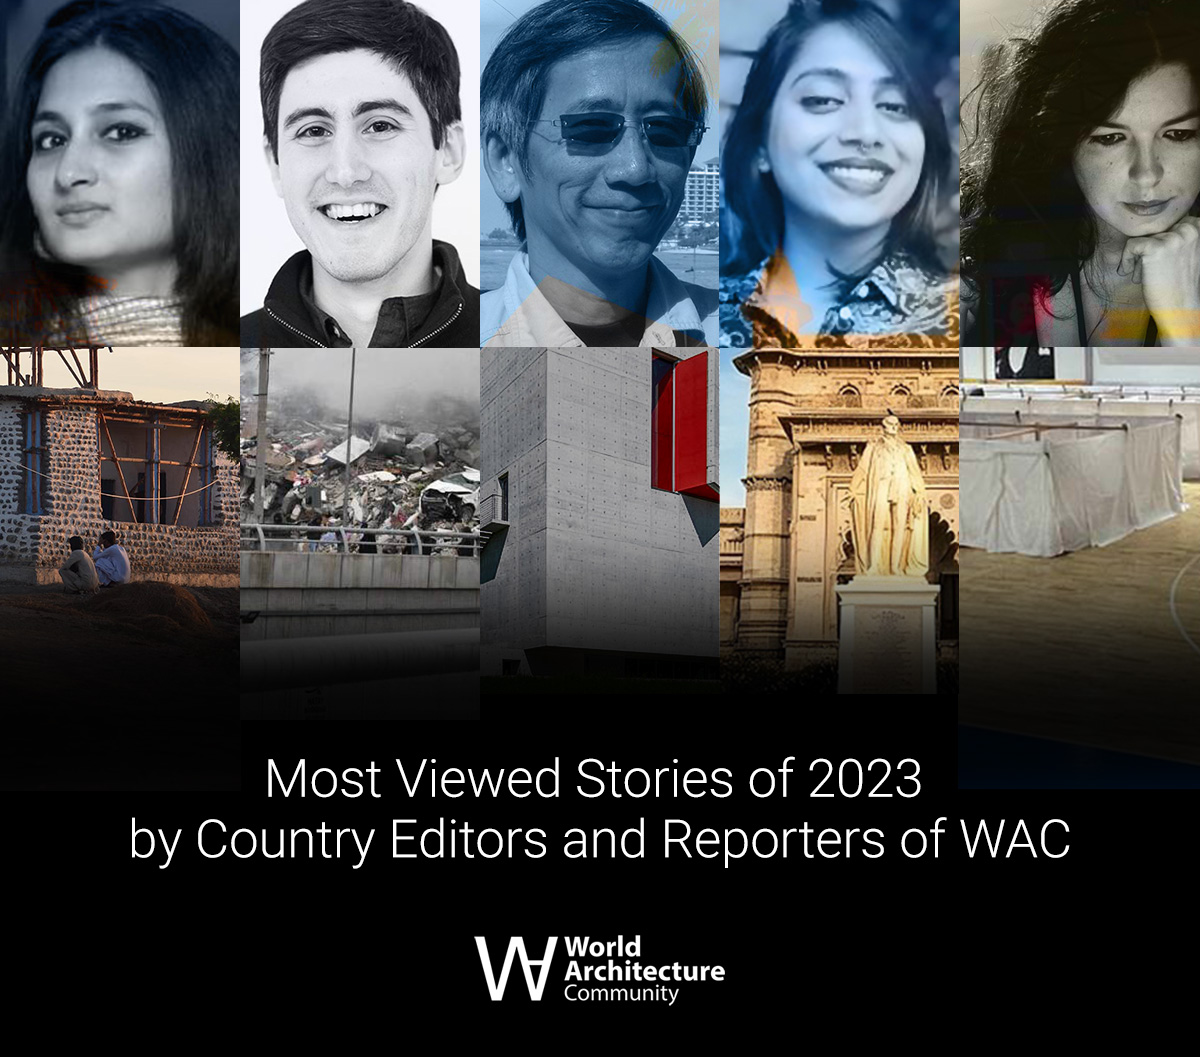 5 most viewed stories by WAC Country Editors/Reporters in 2023